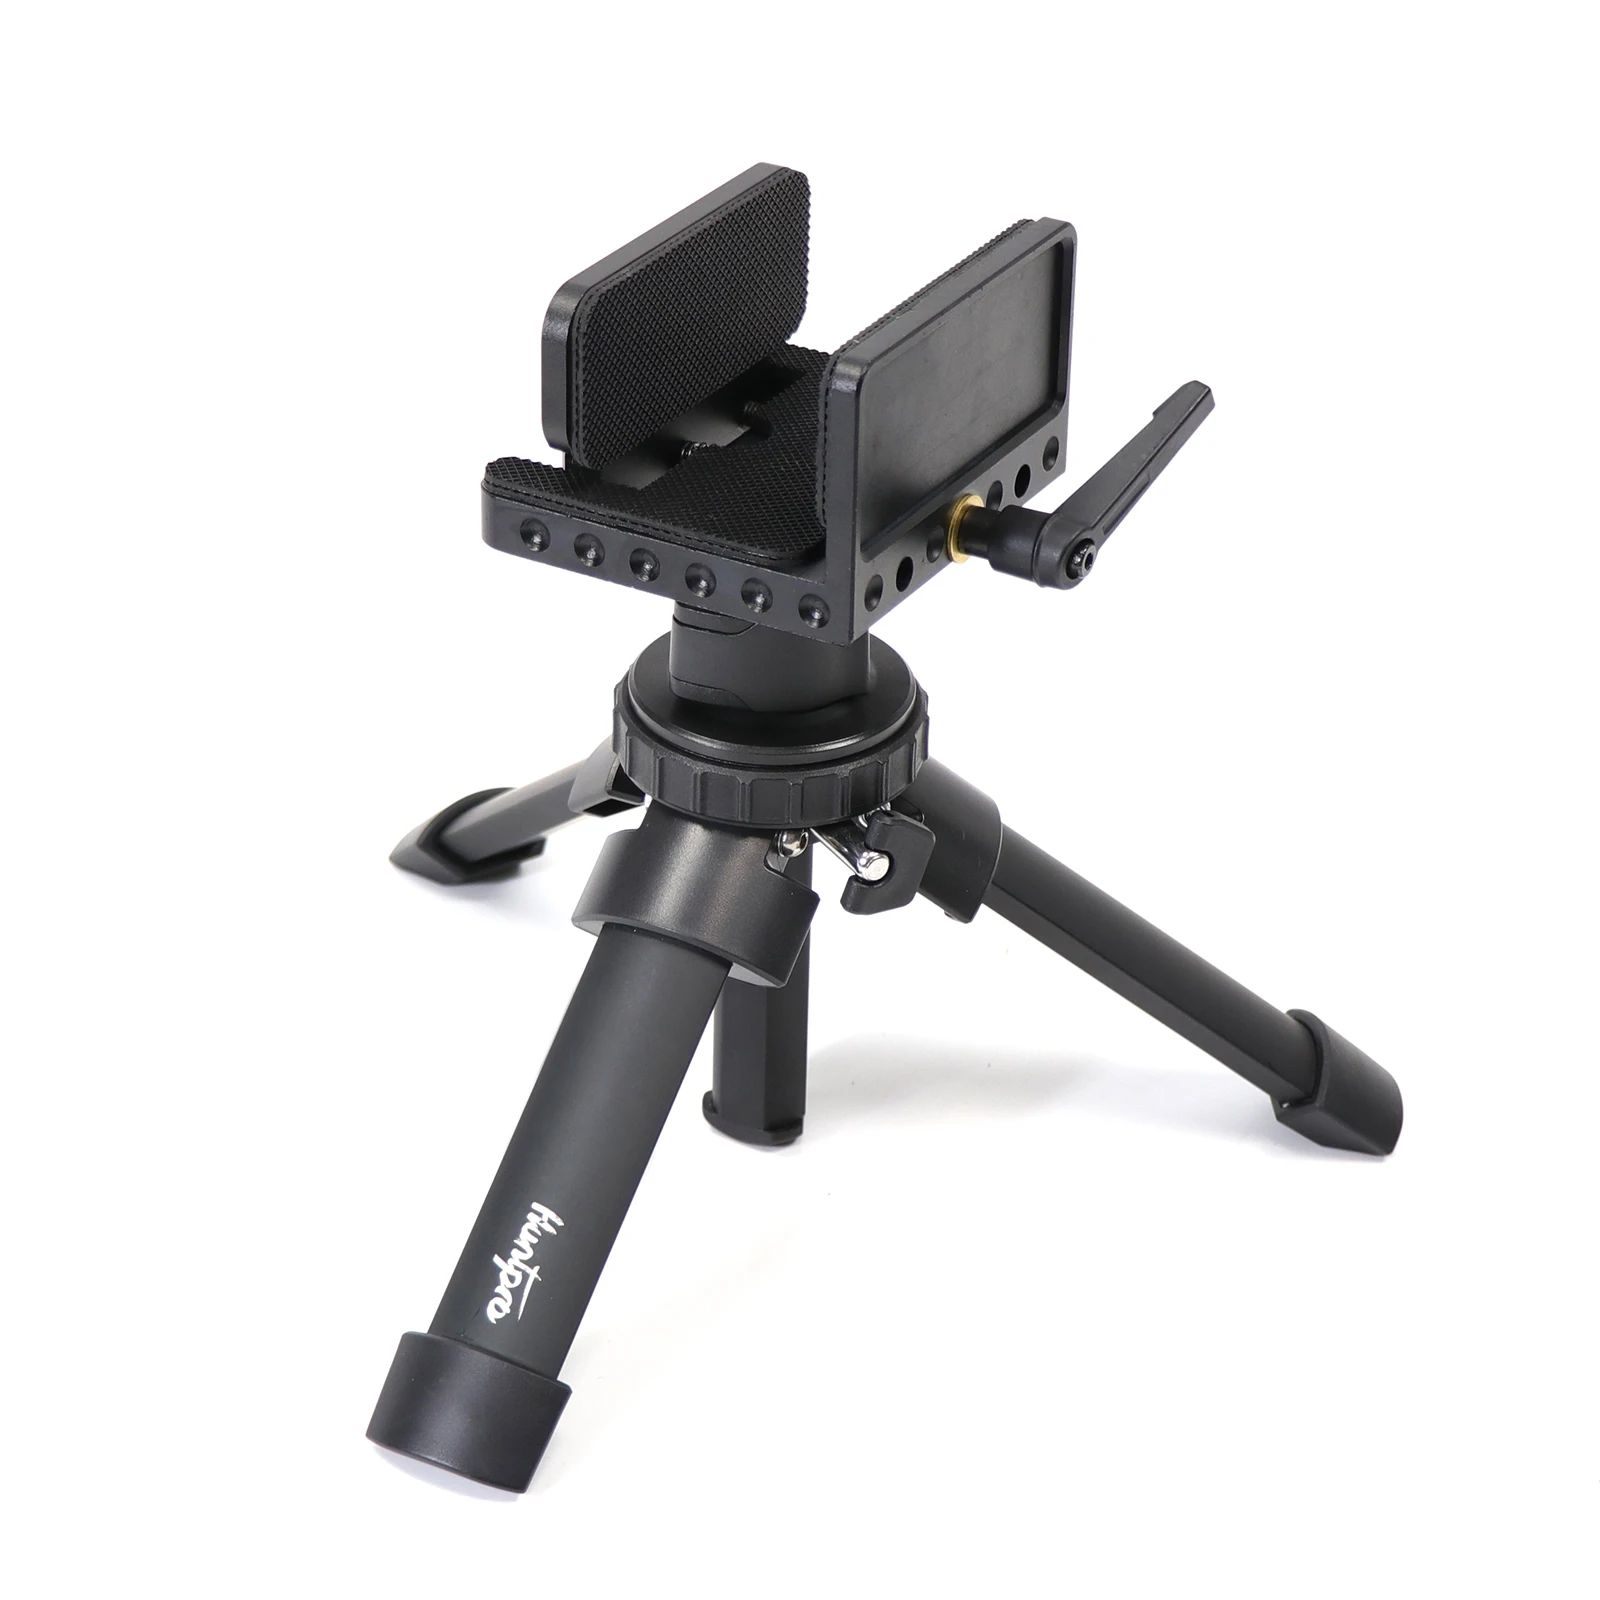 Professional Shooting Rest Mini Hunting Tripod Adjustable Height Bench Rest Aluminum Gun Saddle Clamp Shooting Stick for Outdoor